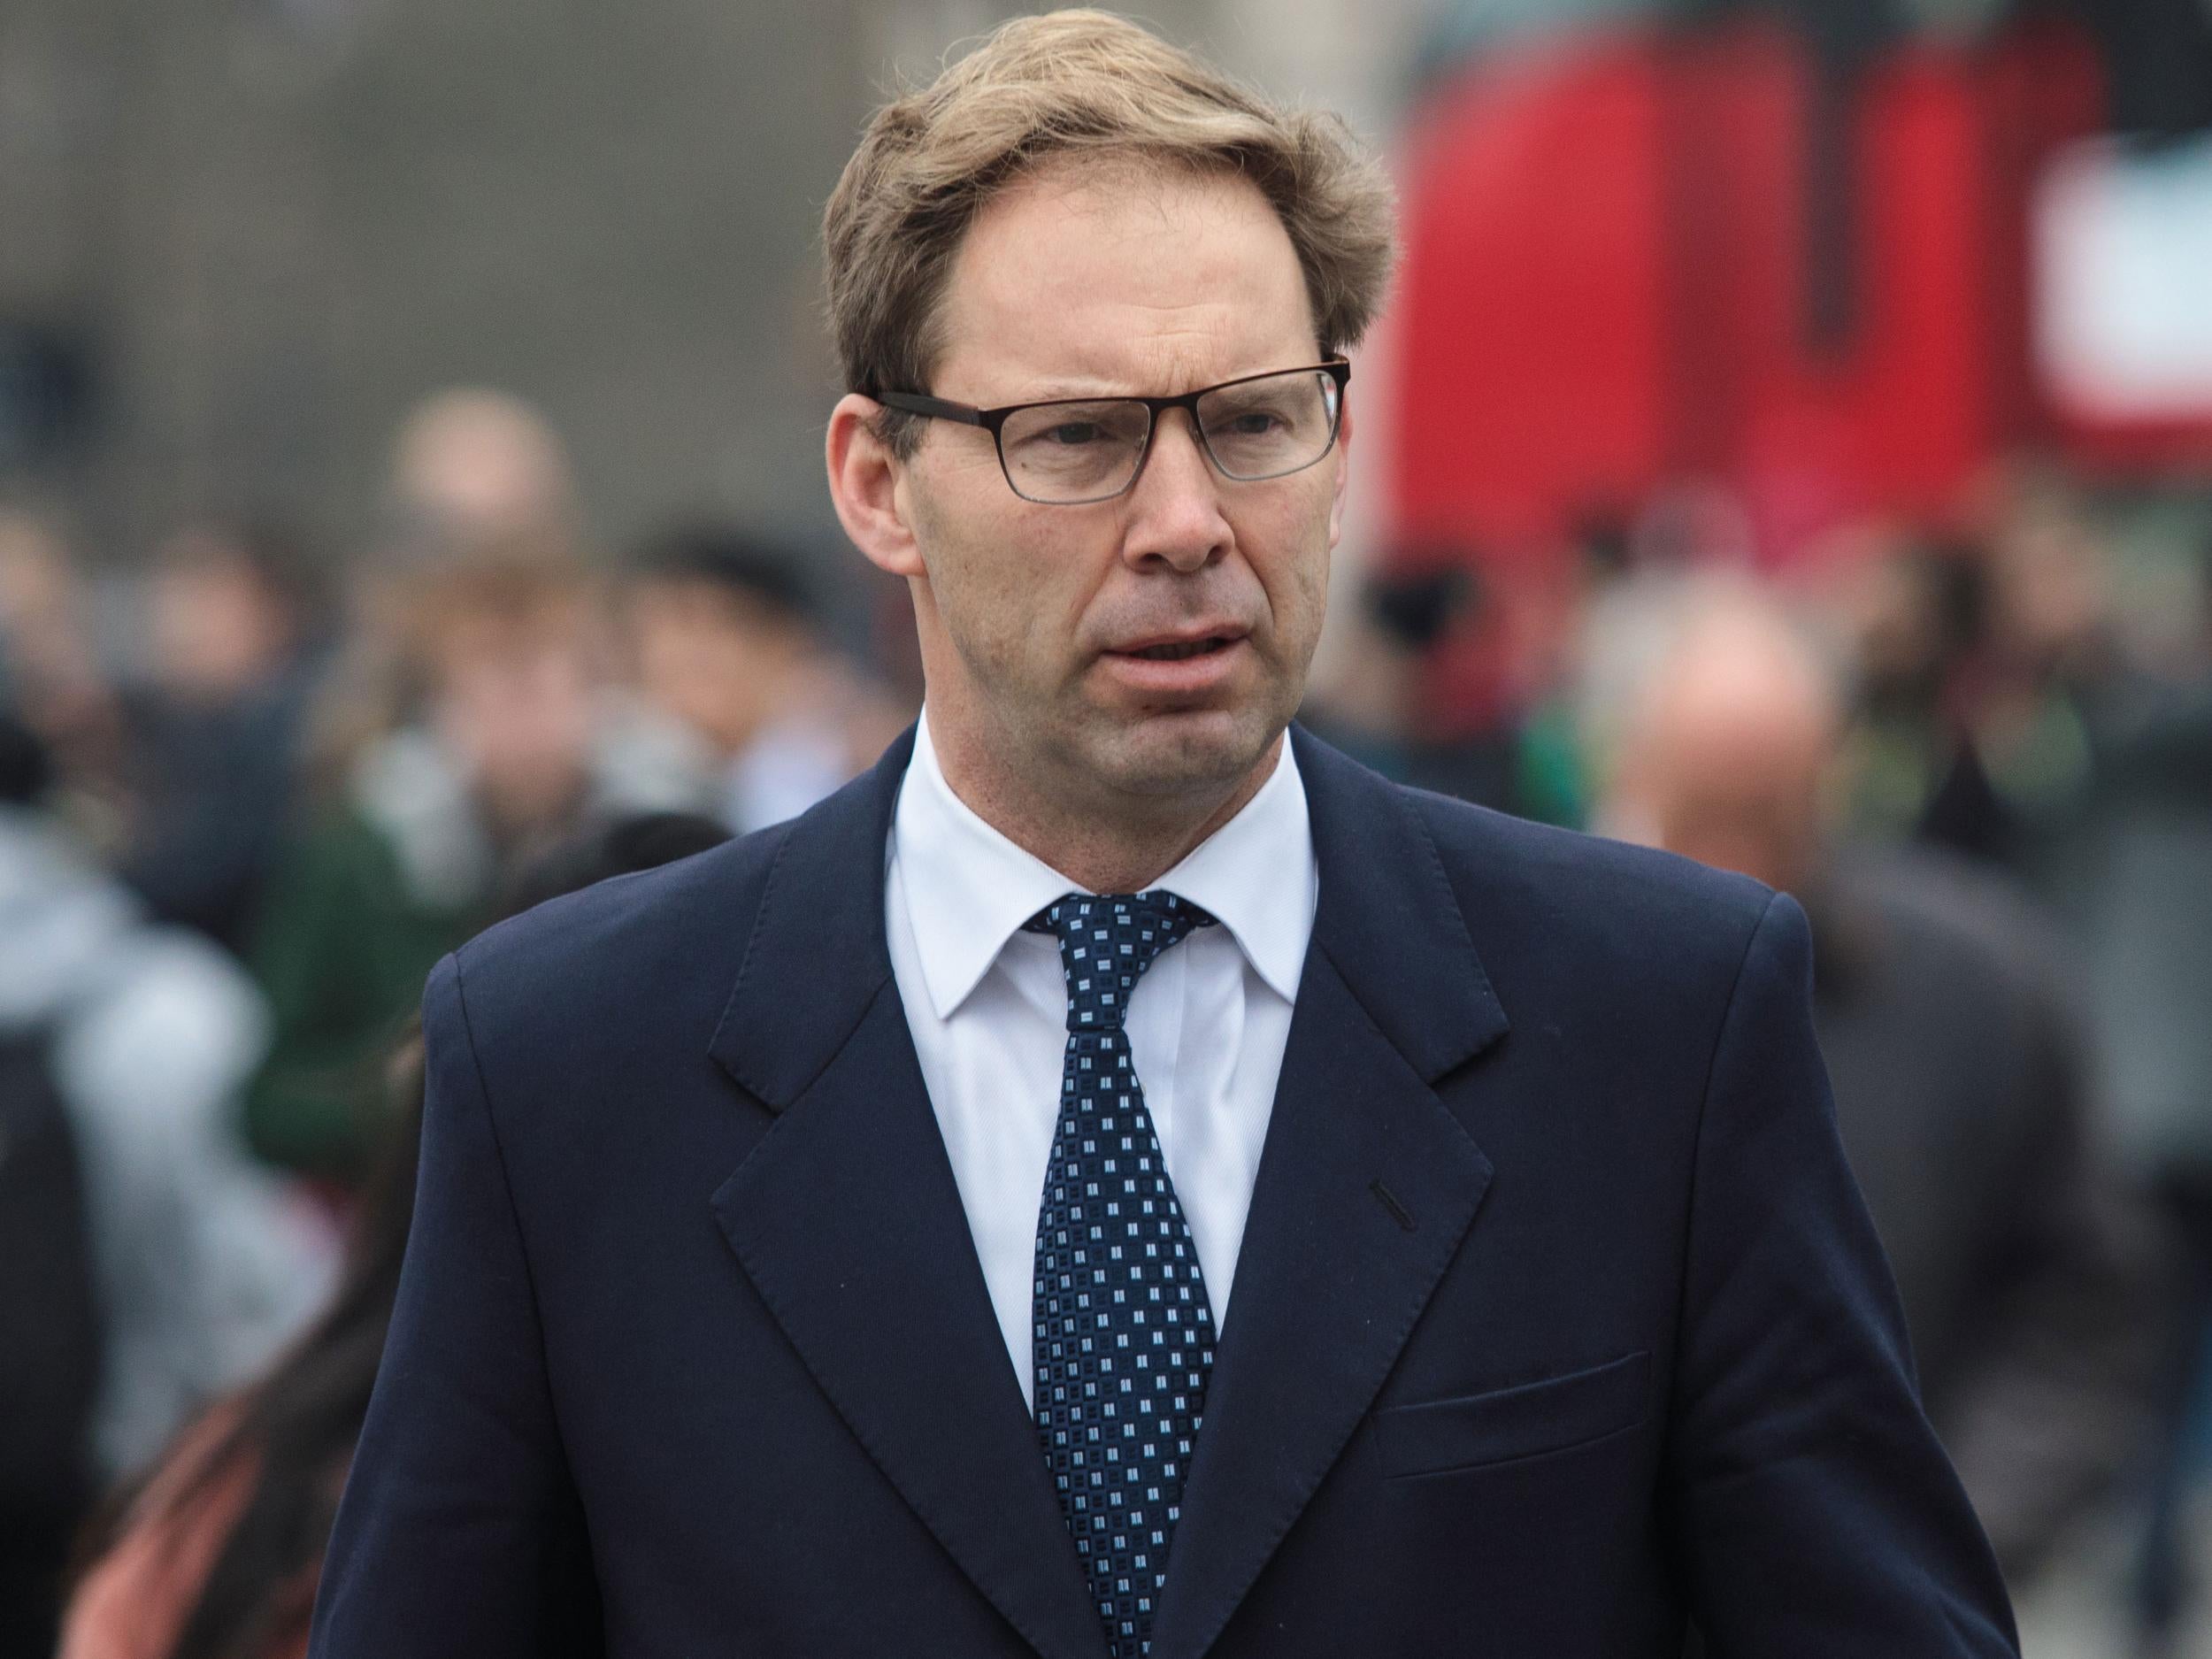 Tobias Ellwood said Western intervention in Libya was necessary to protect civilians